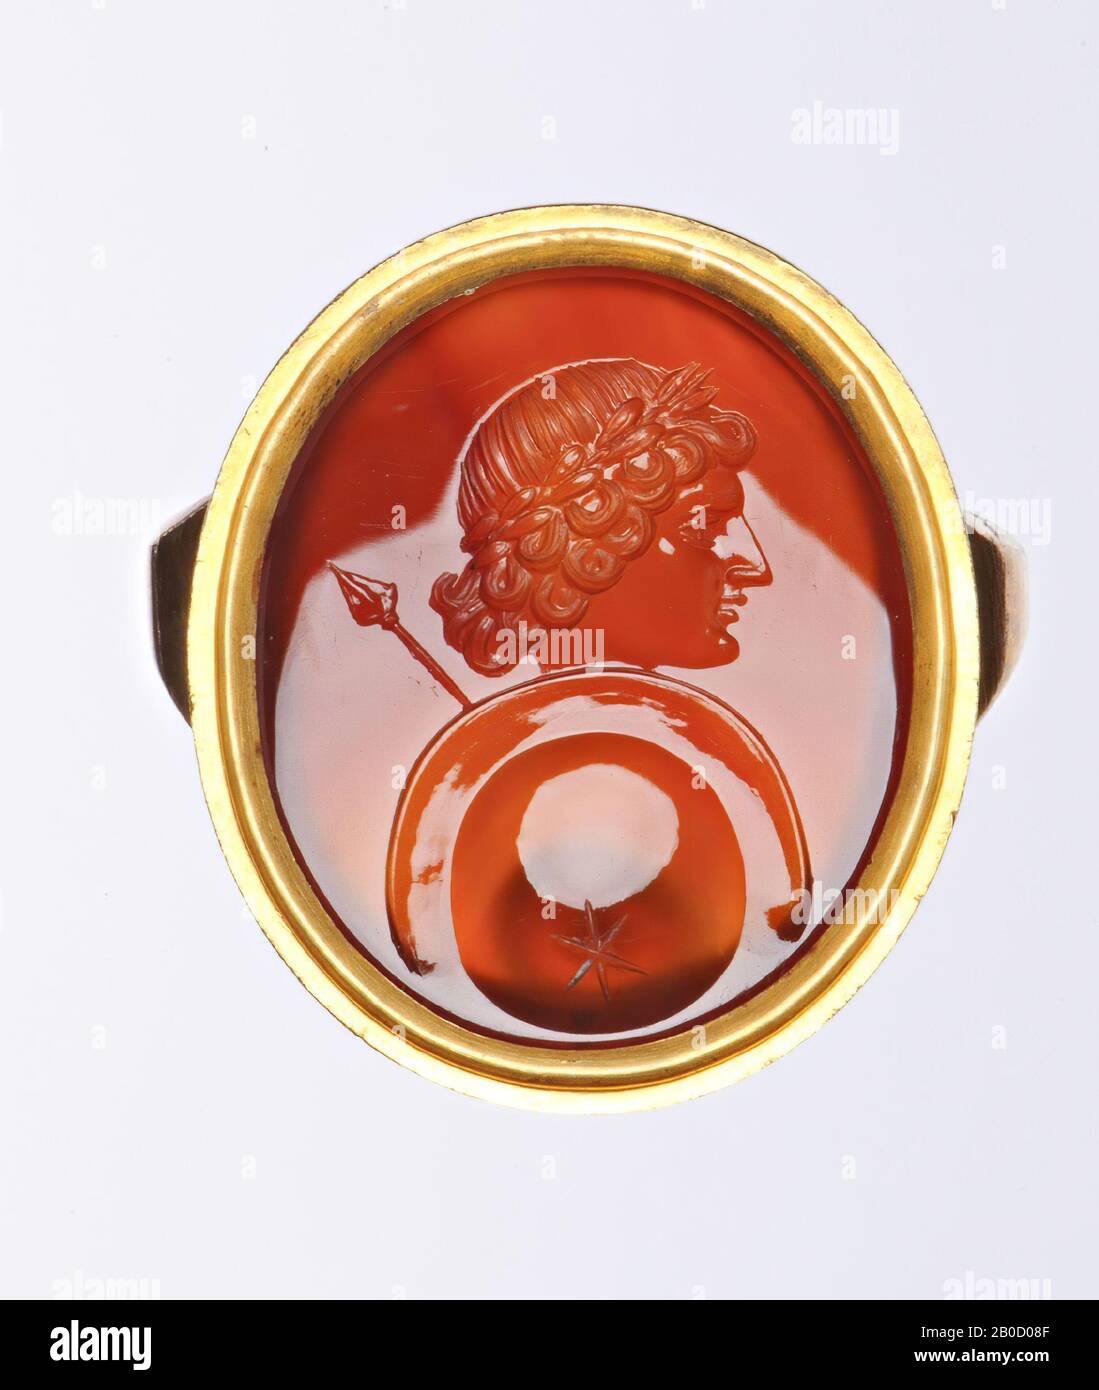 Vz: half-figure of warrior to the left, head and profile protrudes above shield, laurel wreath, spear over shoulder, gem, intaglio, carnelian, Color: orange-red, Shape: oval, standing, Processing: in gold ring, :, 23 x 18 mm, D. 4 mm, wt. 7.05 gr., 18th century 1700-1800 Stock Photo